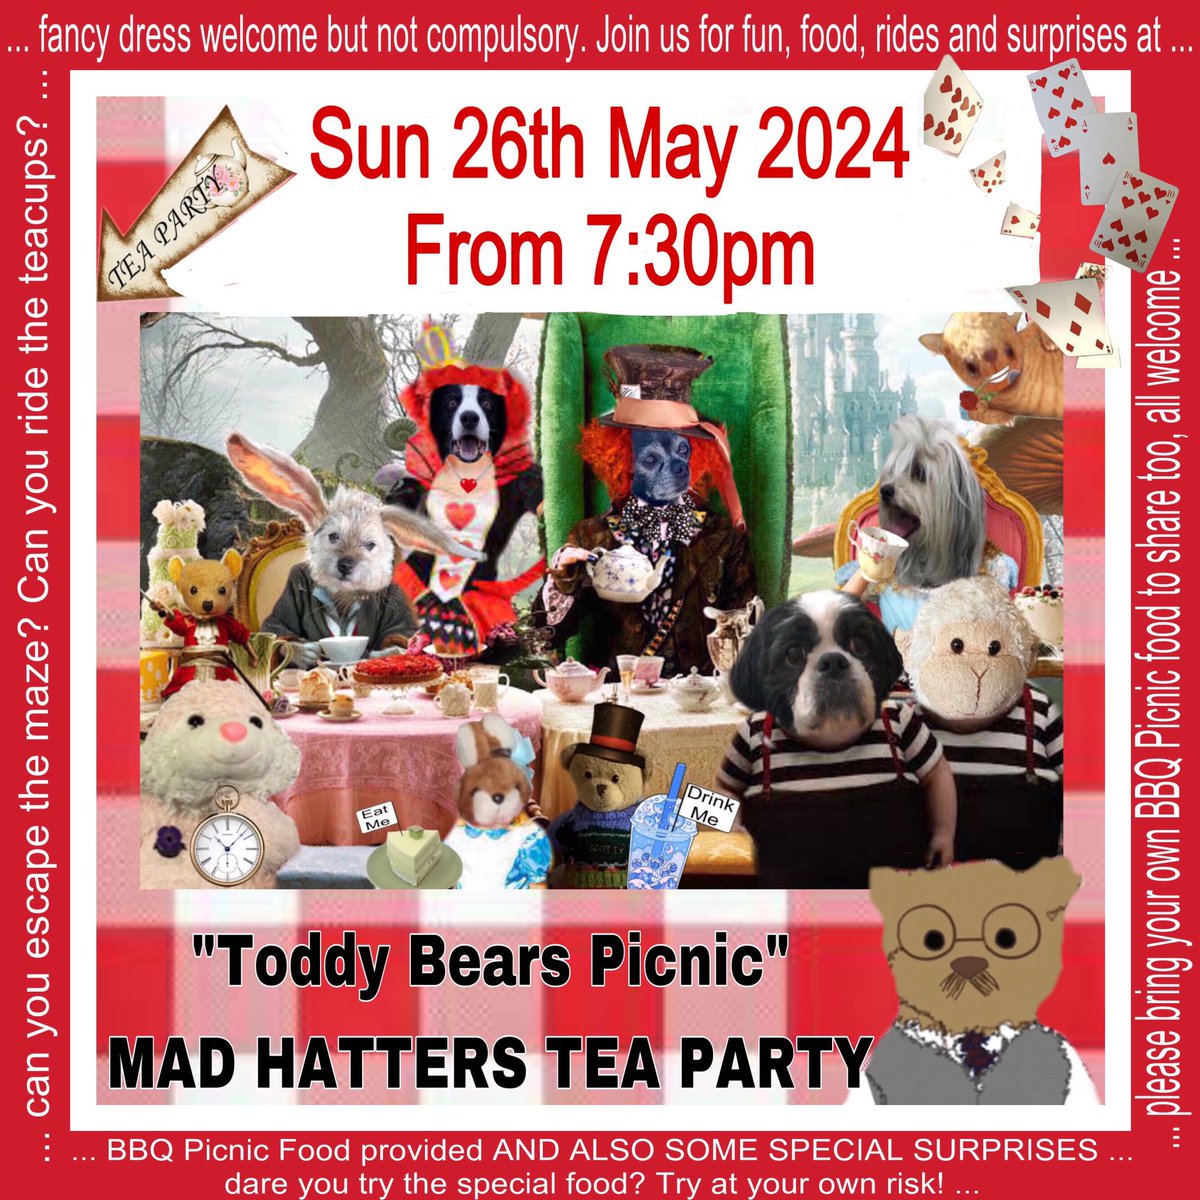 I'm very pleased to announce two upcoming #FurryTails events. We have our delightful pudding club this Thursday with @Deadlysecret007 and also please note that next Sunday is our annual Toddy Bear Picnic. We are beyond excited to share the day with you and hope you'll attend!